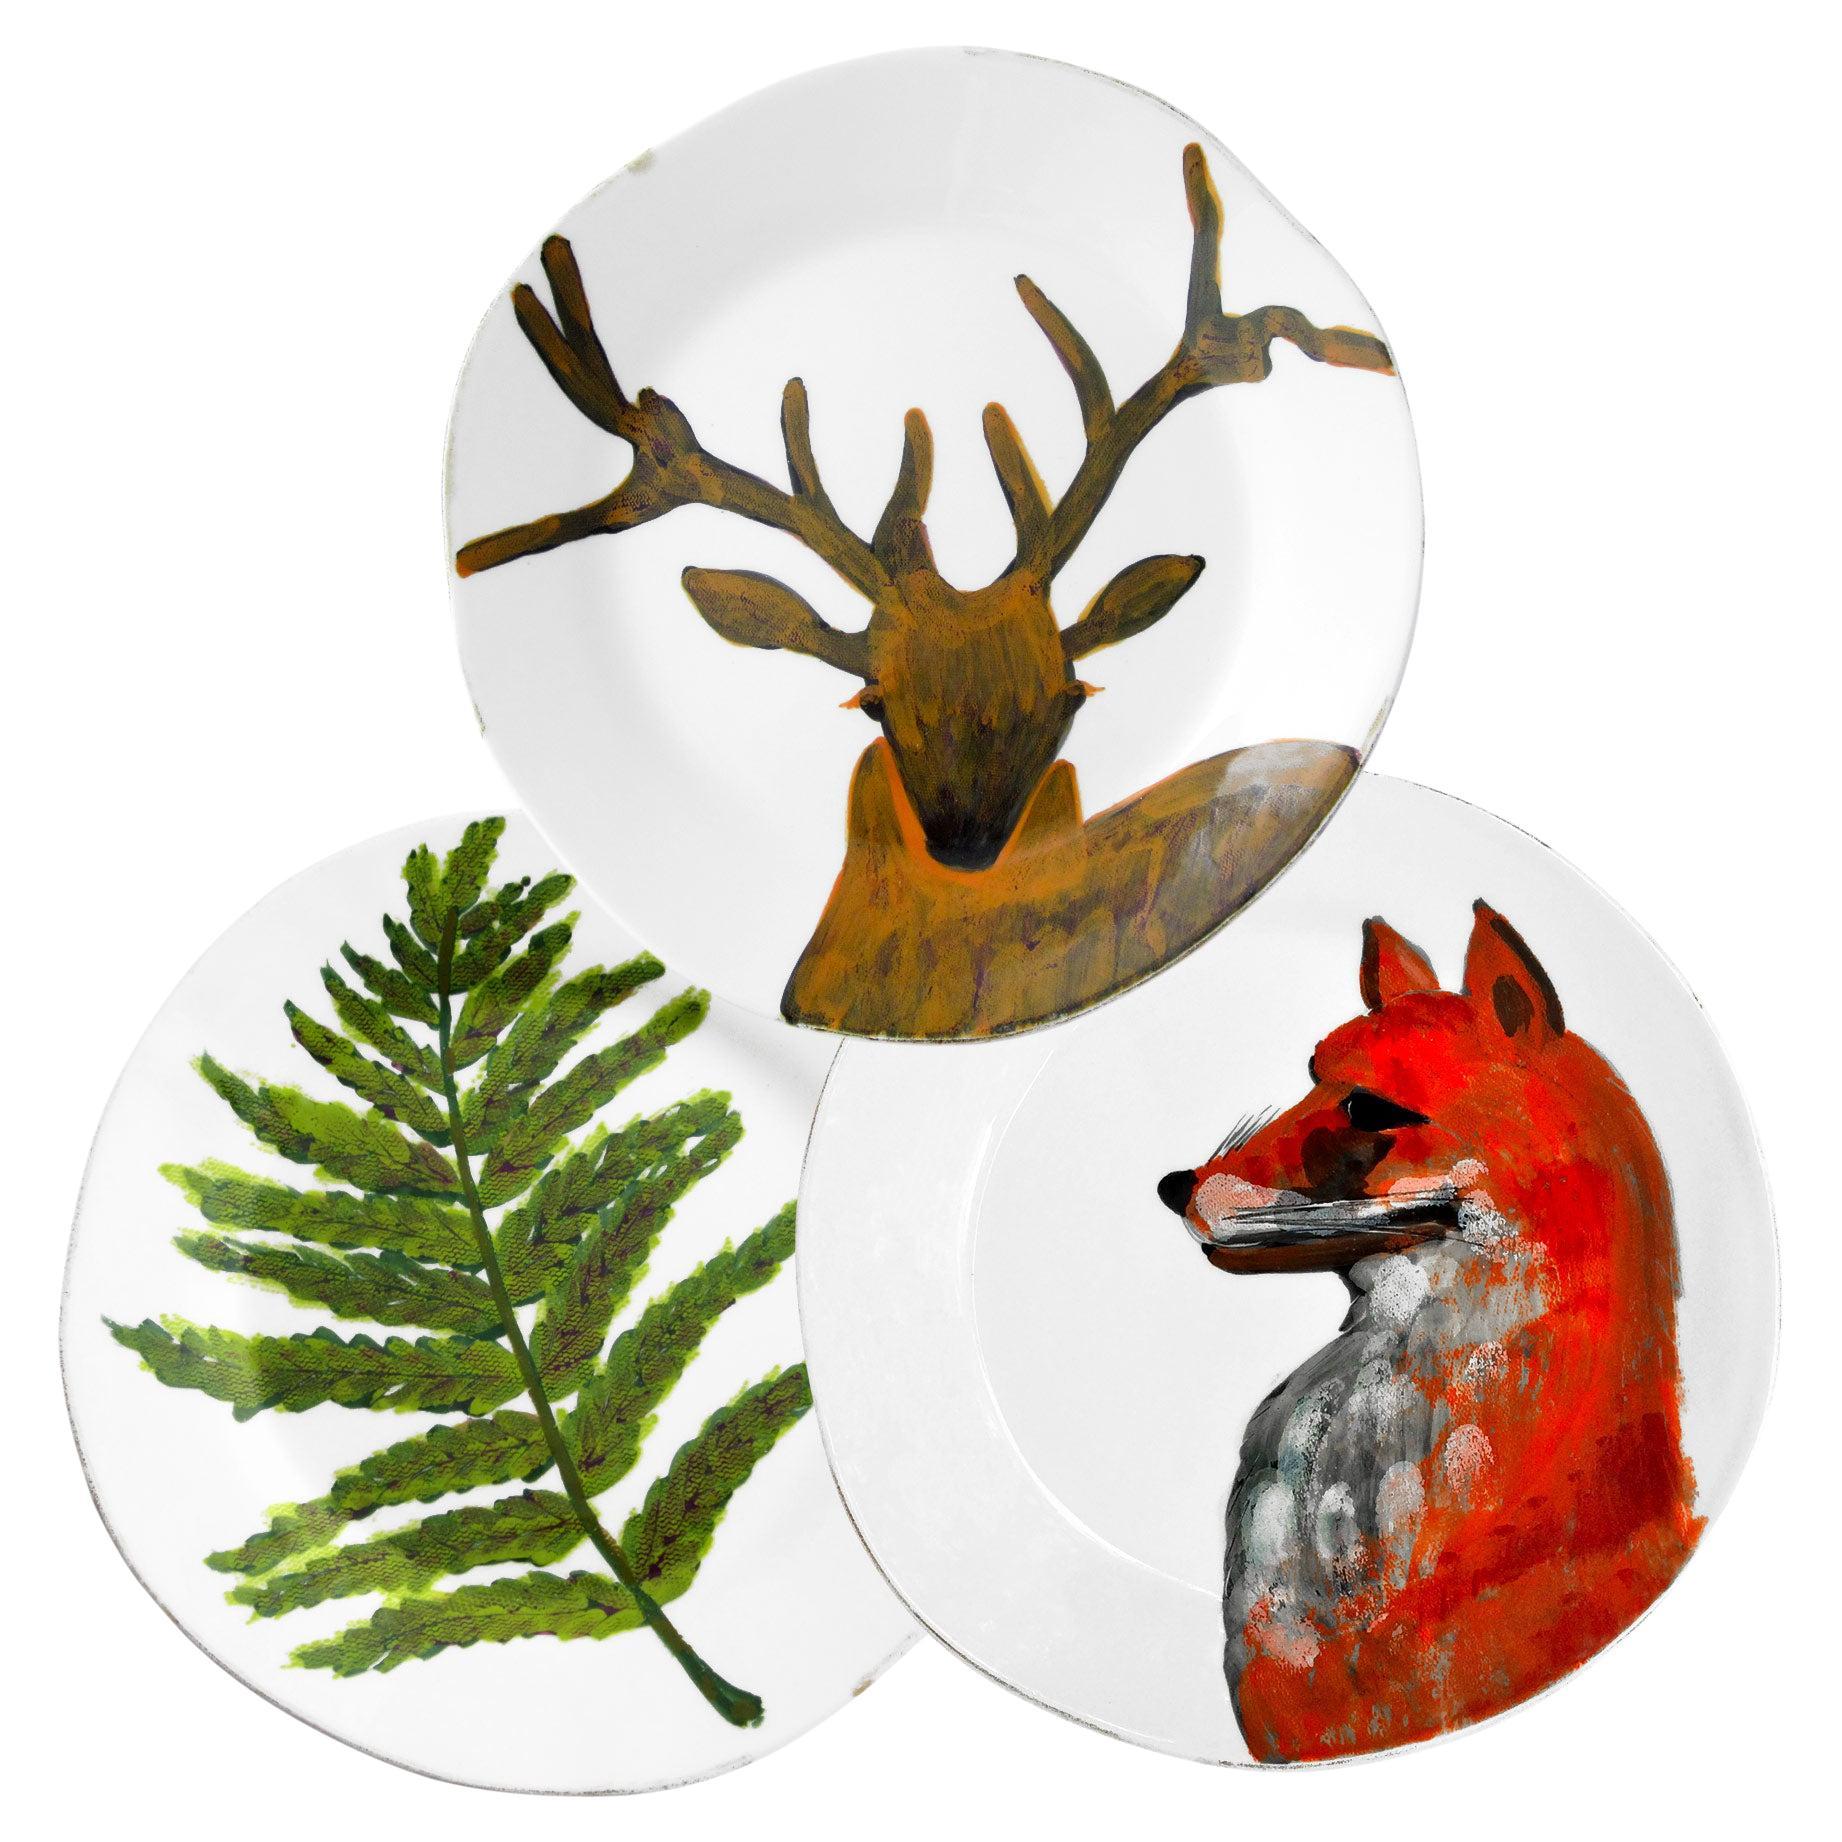 "Walking in the Forest" Majolica Set Designed by Aude Clément for 12 People